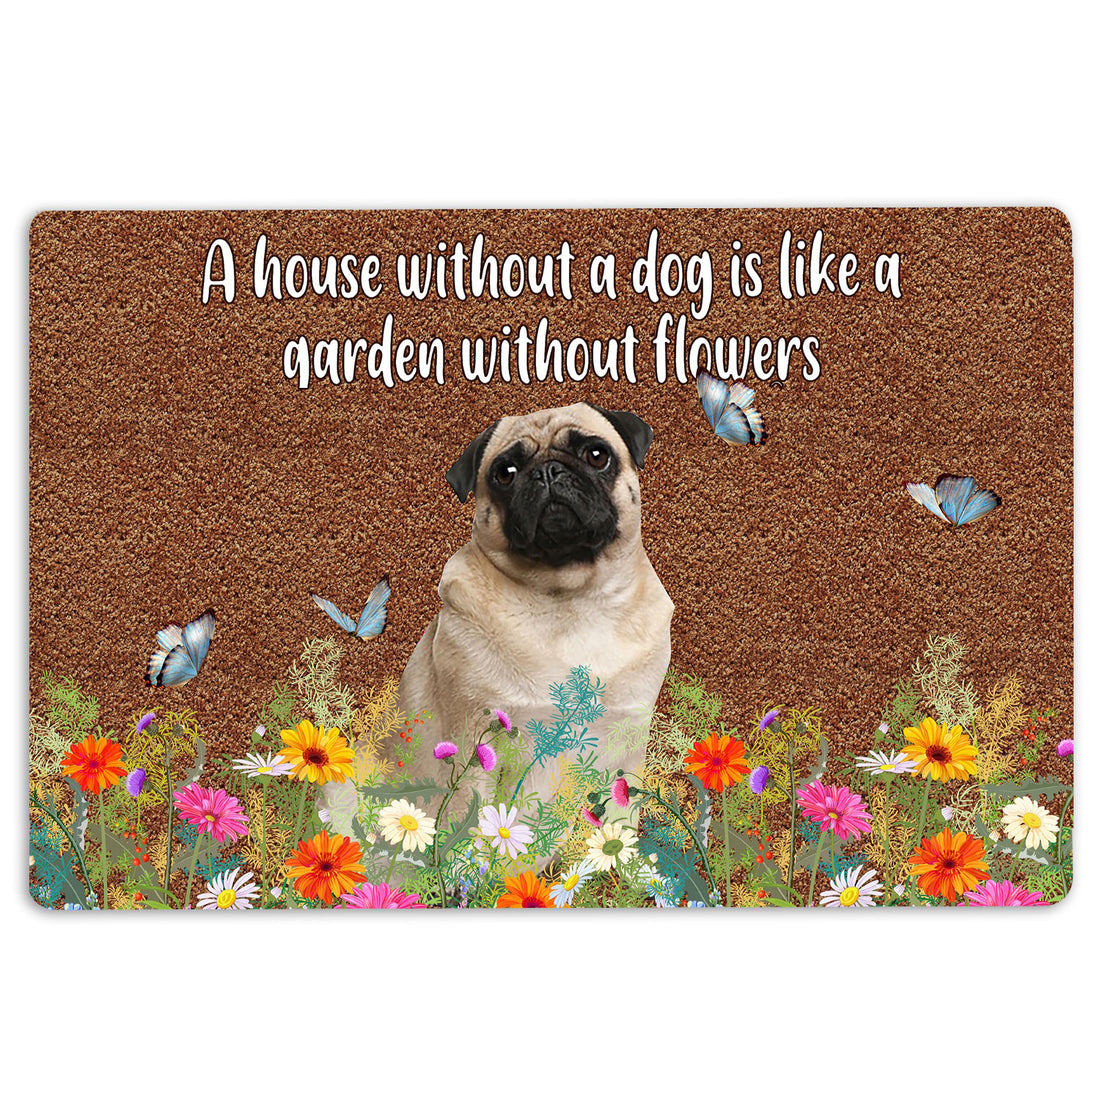 Ohaprints-Doormat-Outdoor-Indoor-Pug-A-House-Without-A-Dog-Is-Like-A-Garden-Without-Flowers-Rubber-Door-Mat-1242-18'' x 30''